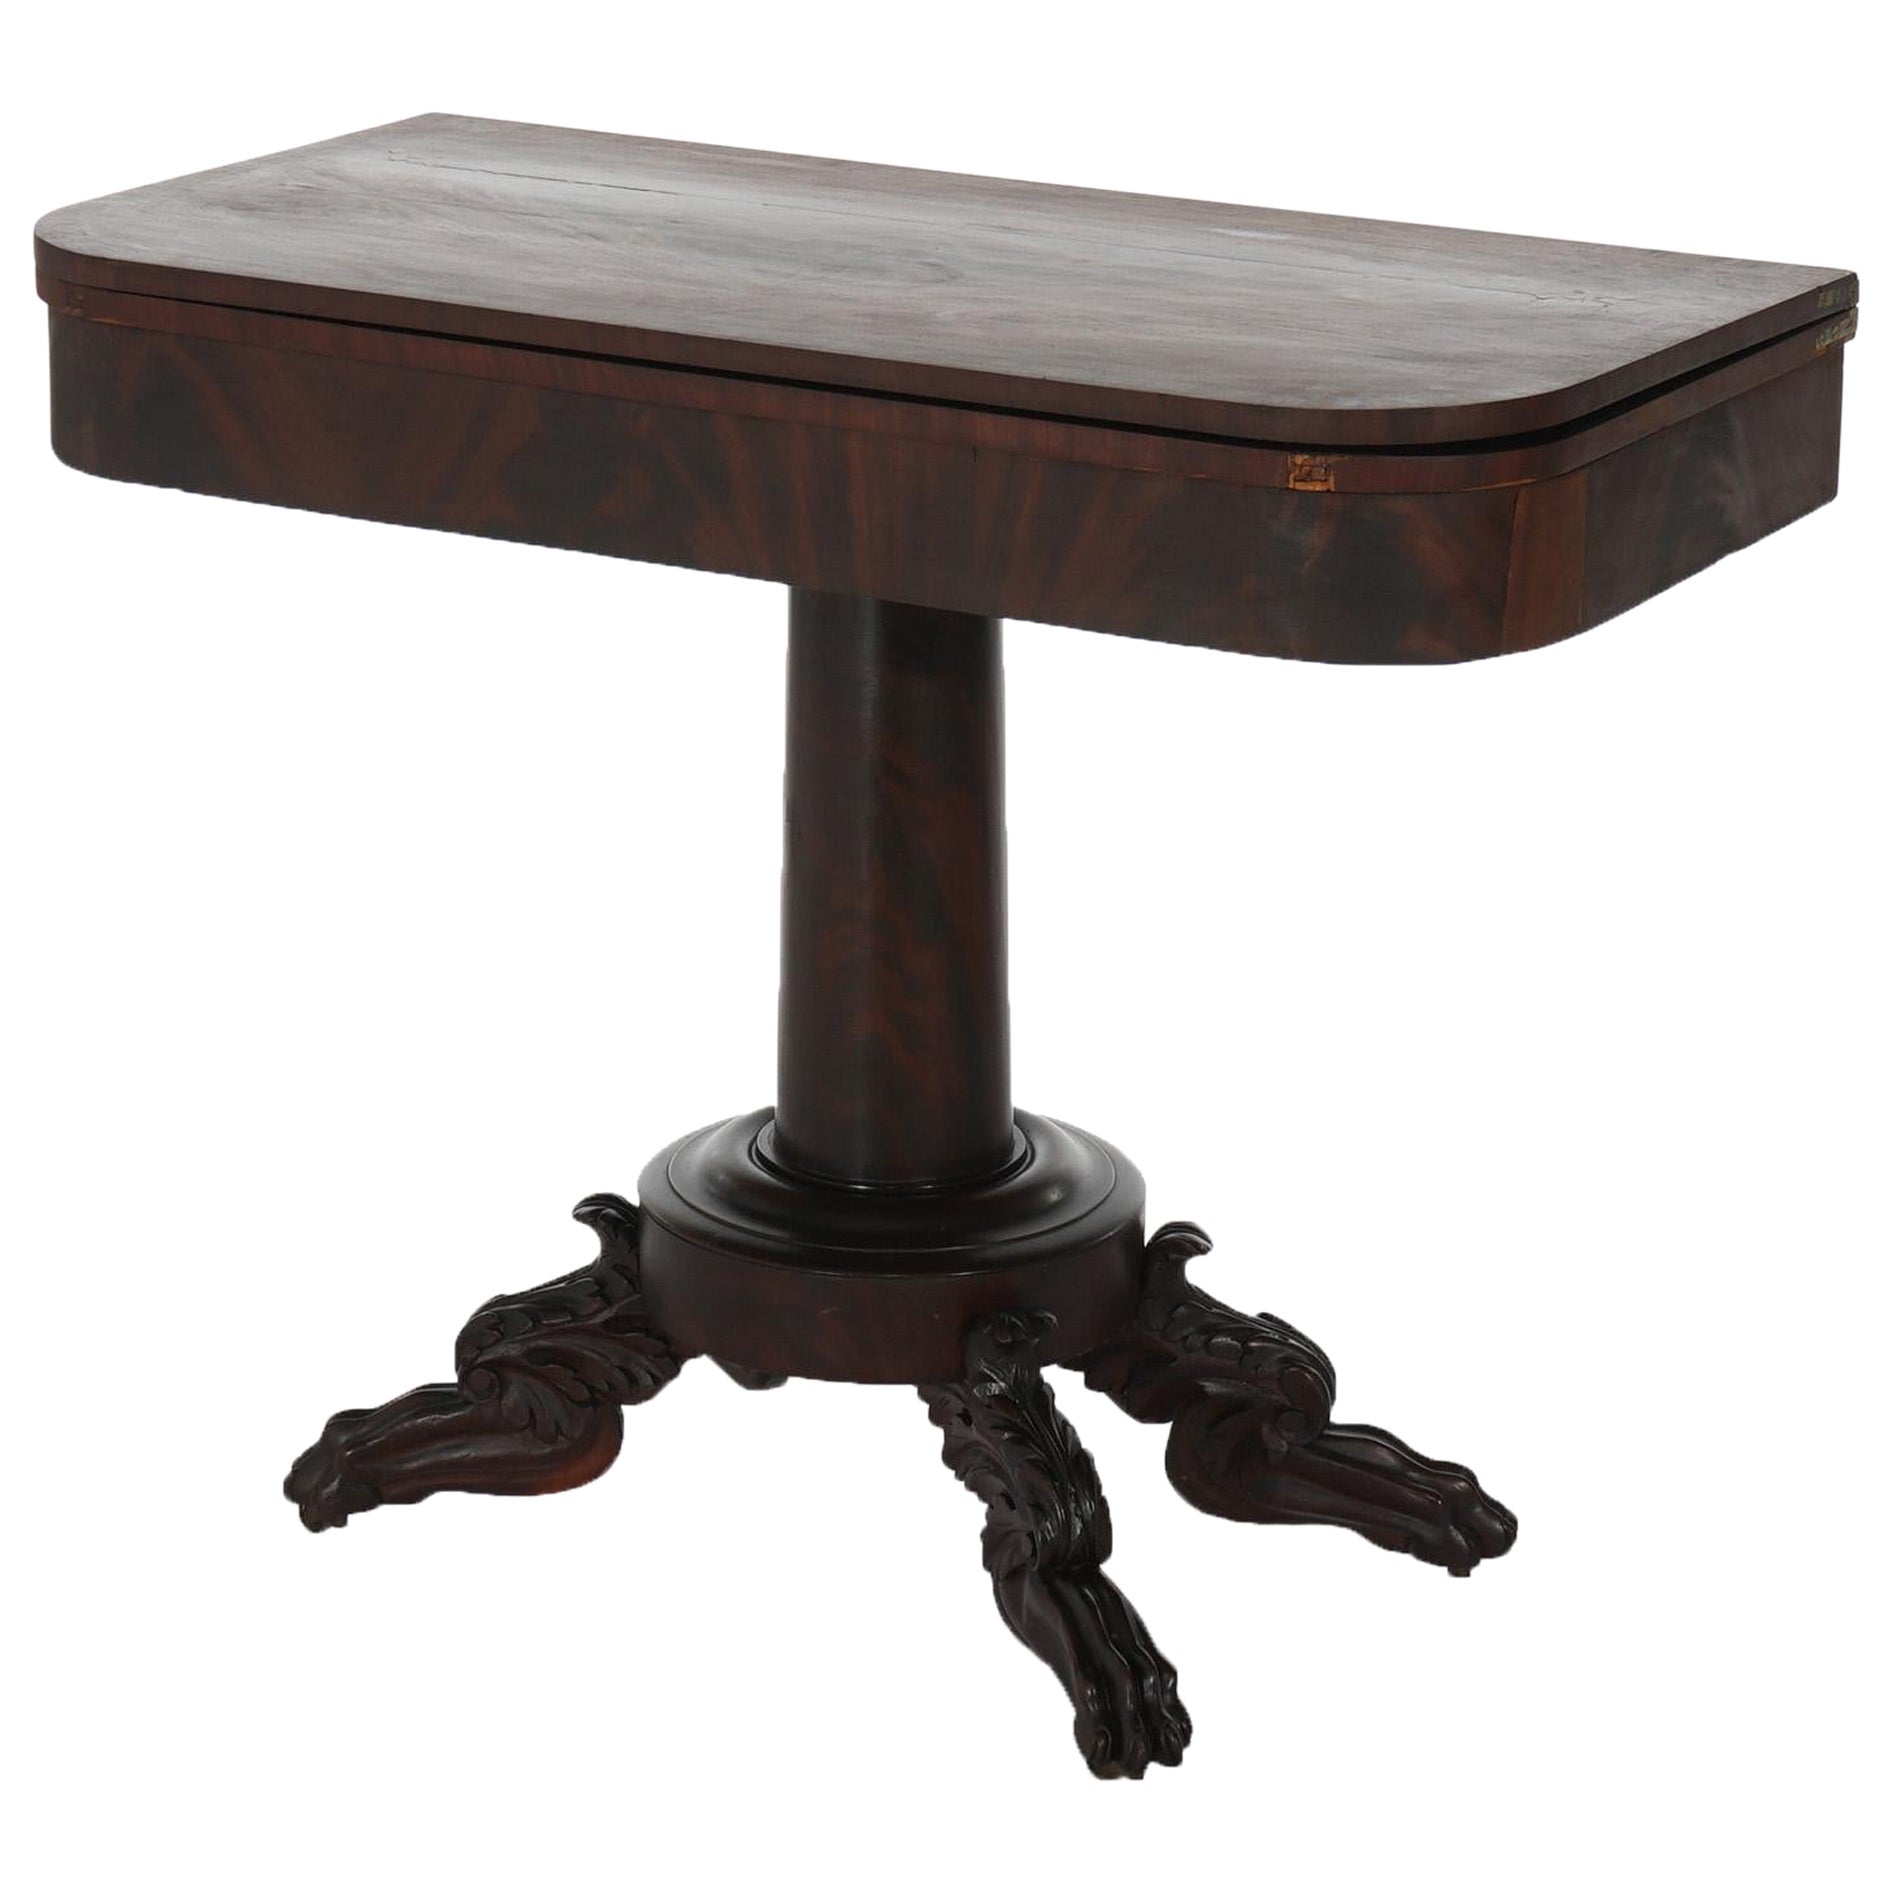 Neoclassical American Empire Flame Mahogany Game Table with Paw Feet c1840